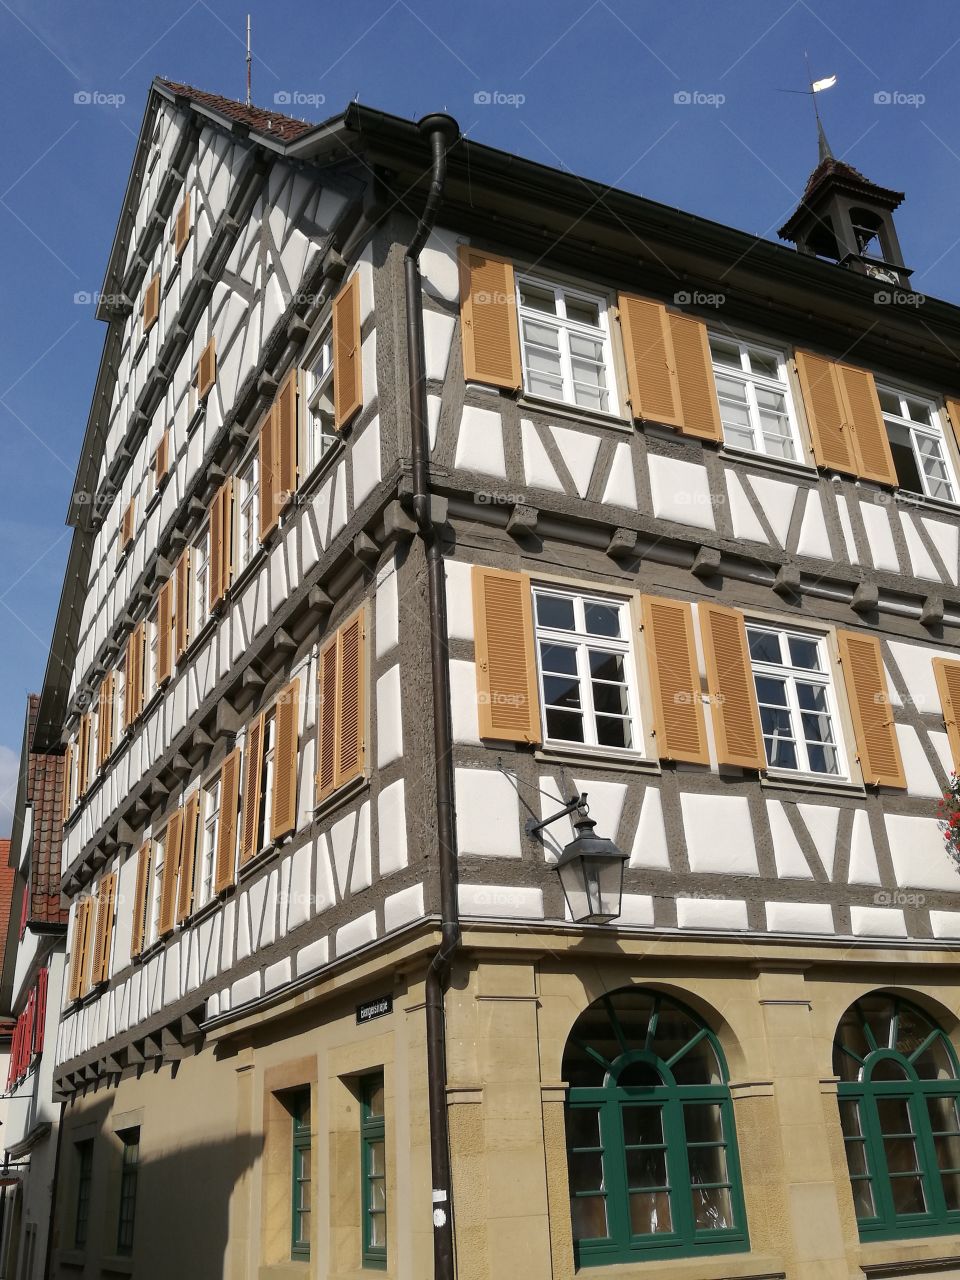 Old Town Hall in Winnenden - Germany